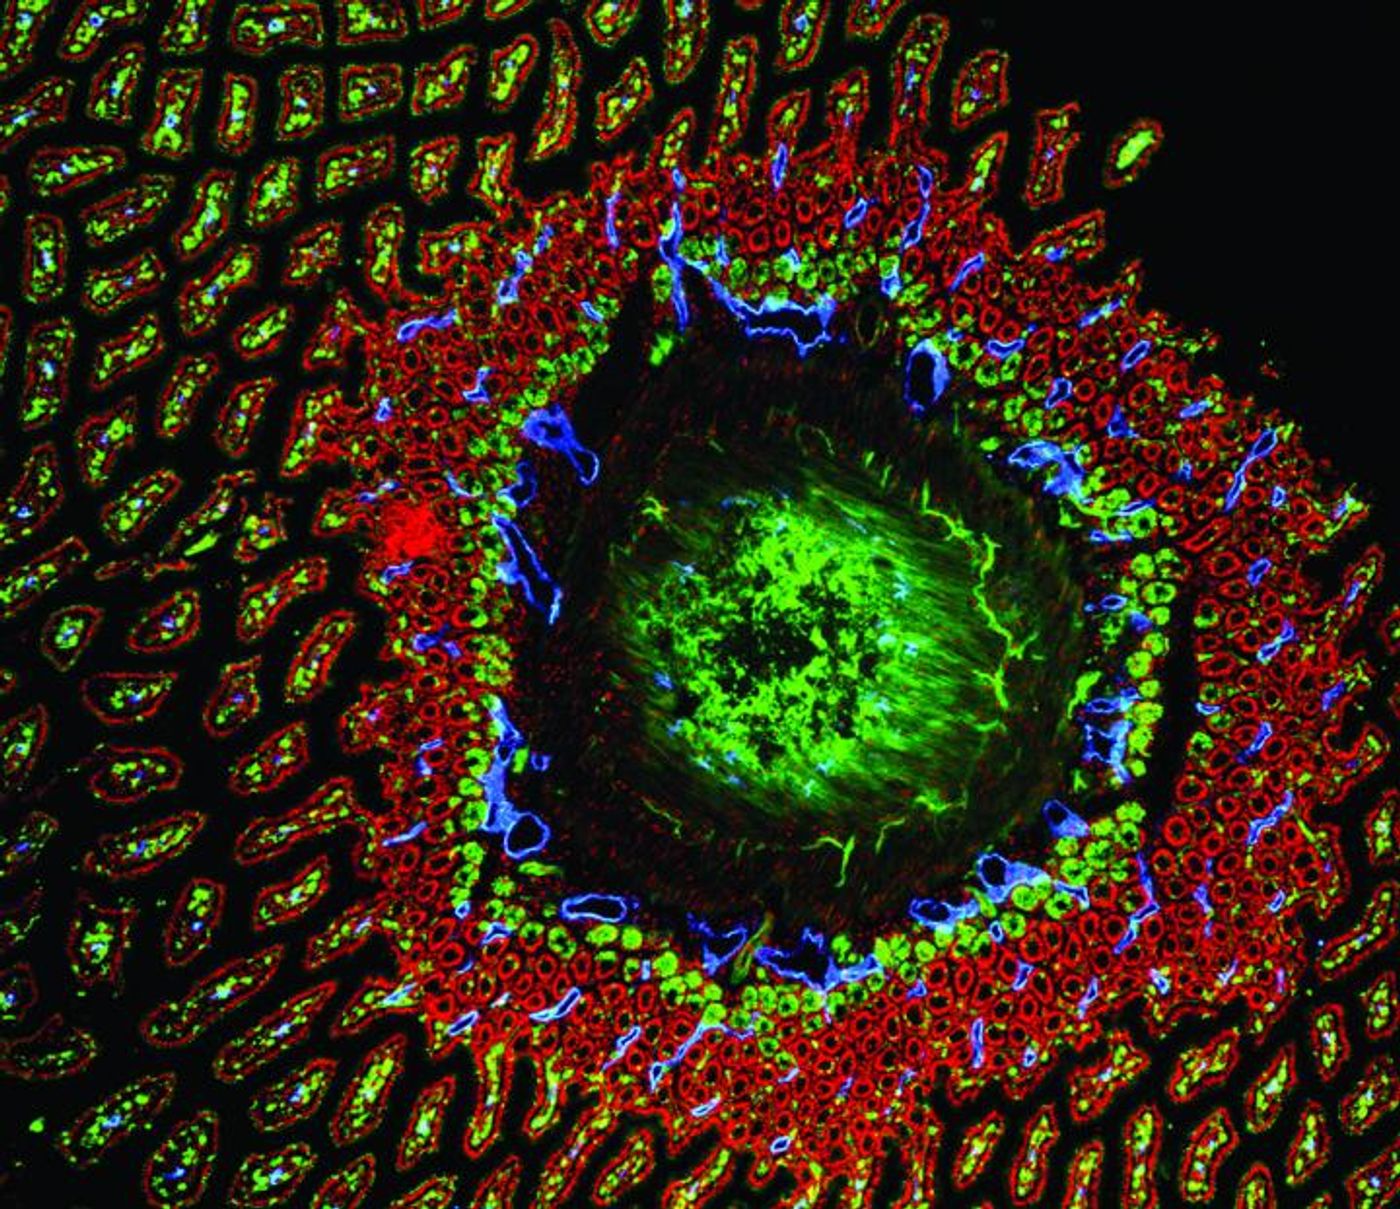 This is picture of a cross section of a mouse intestine. Each 'petal' on the fringe of the image is showing a villus -- a finger-like projection extending into the lumen of the small intestine. / Credit: Kathleen Caron Lab, UNC